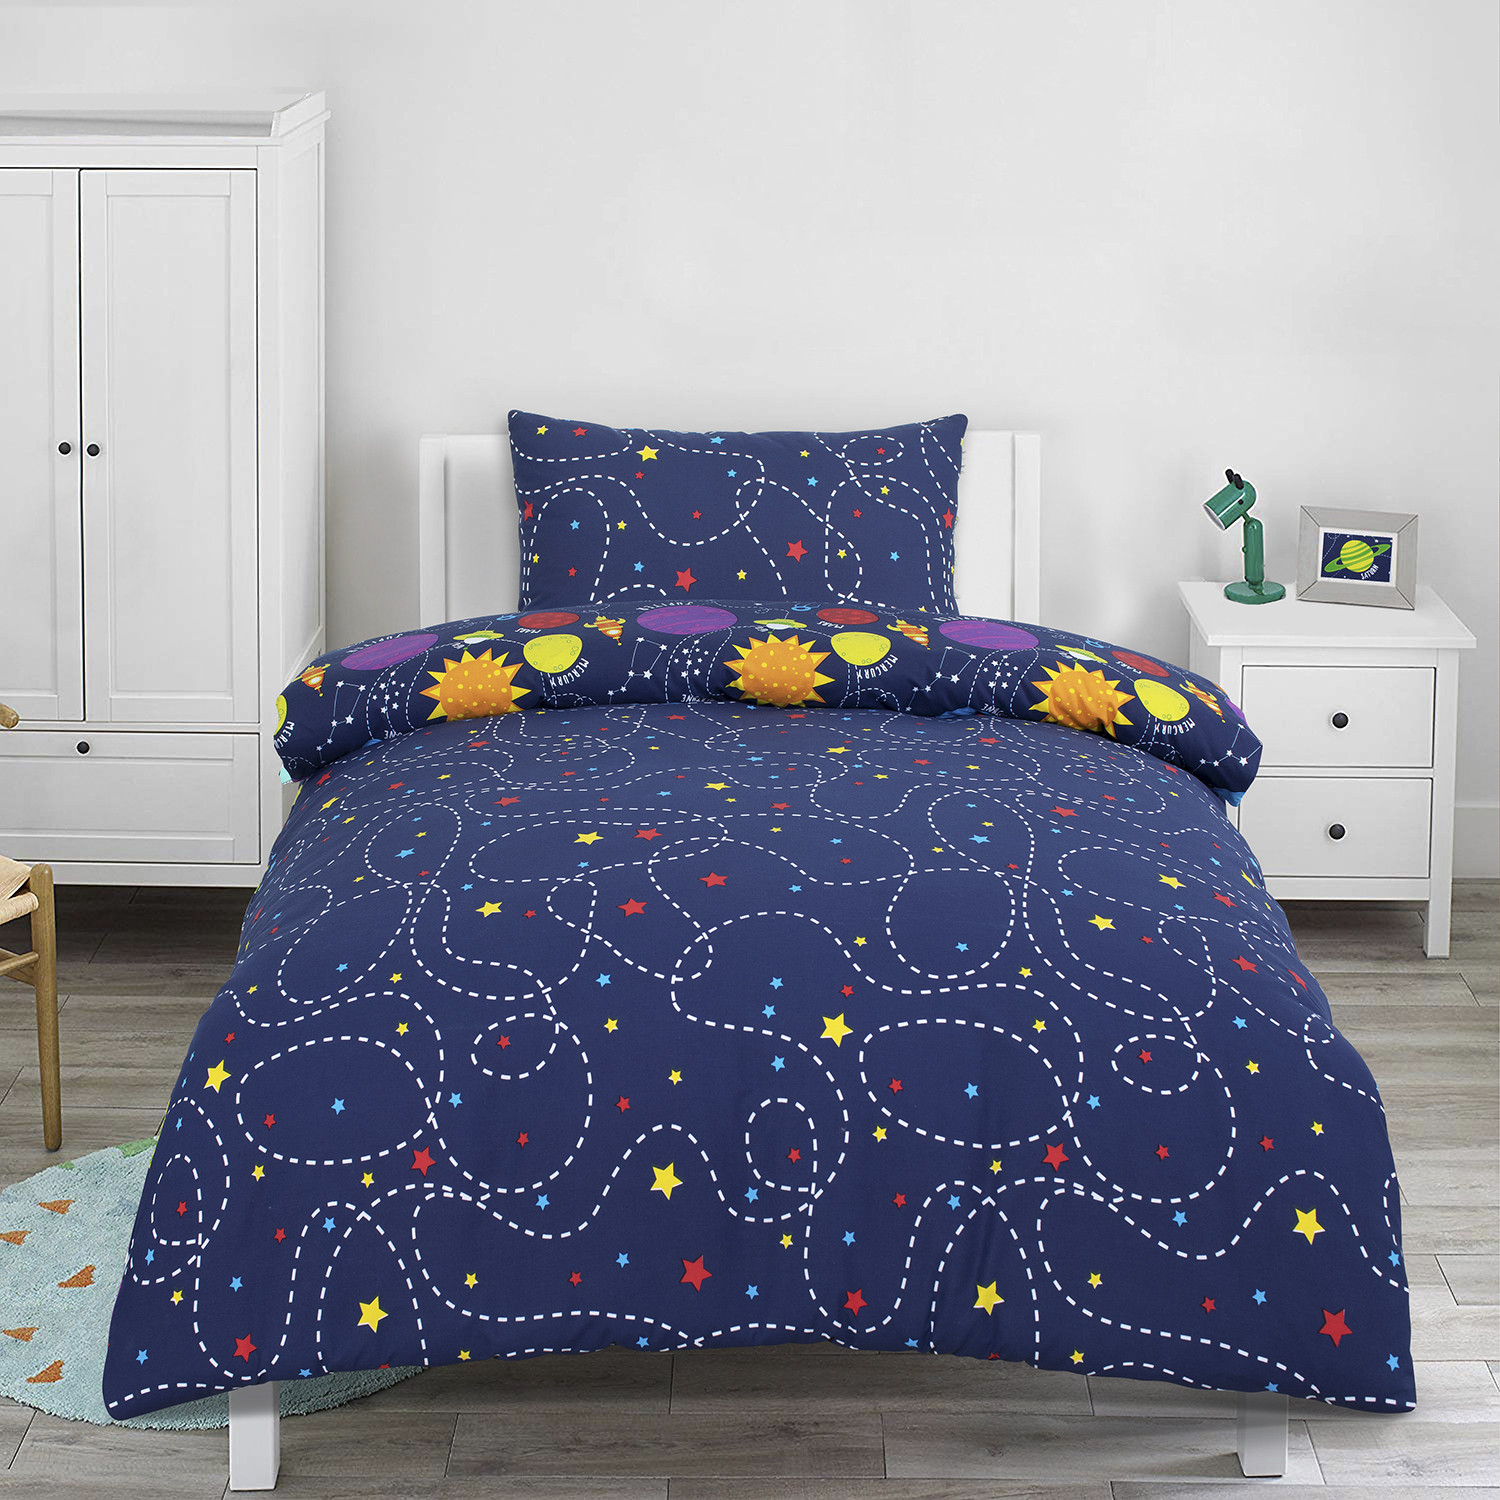 Sleep in Space Single Glow In The Dark Duvet Cover and Pillowcase Set Image 3